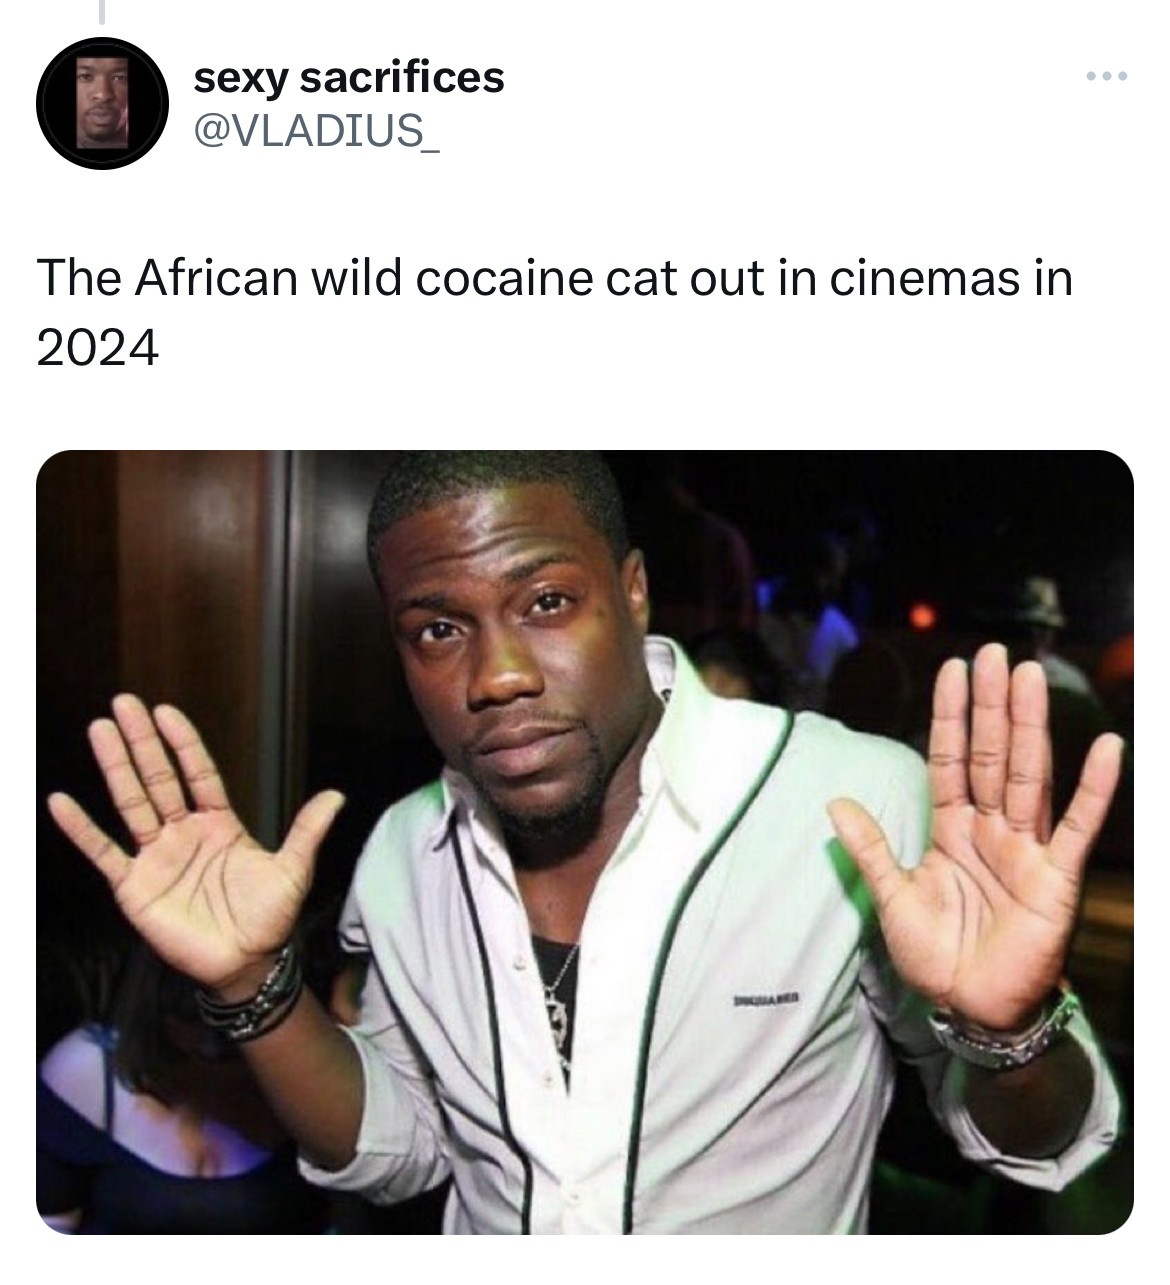 savage and funny tweets -photo caption - sexy sacrifices The African wild cocaine cat out in cinemas in 2024 ...